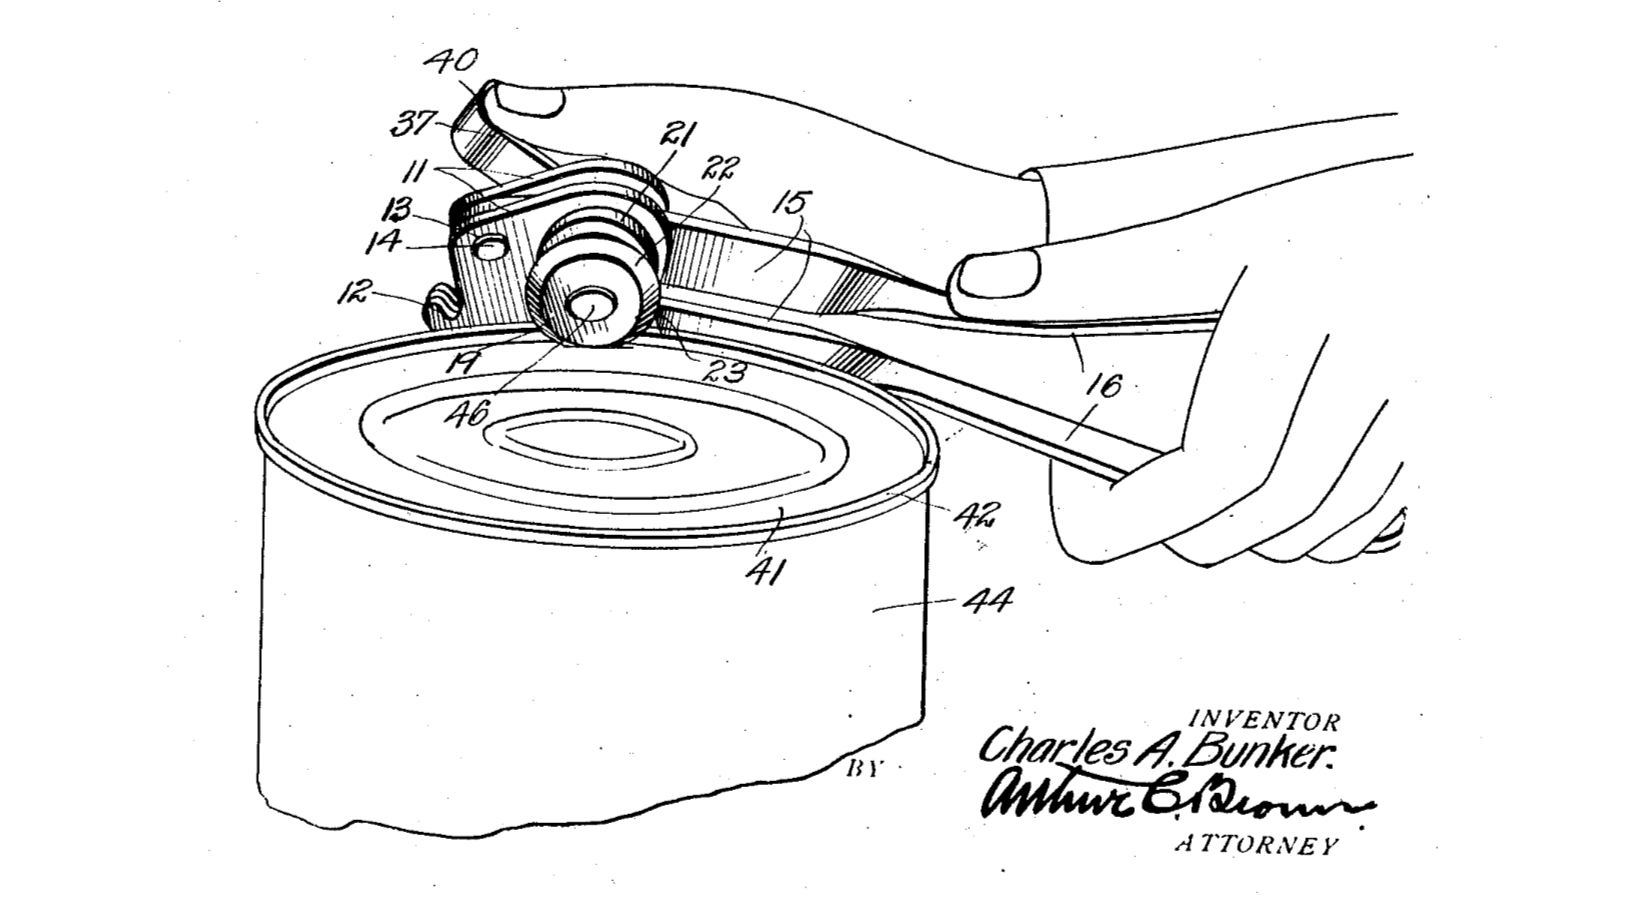 Design for the bunker can opener, showing a hand holding the tool vertically against a can along with with numbered annotations. Invented by Charles A. Bunker and signed by Arthur Brown, his attorney.